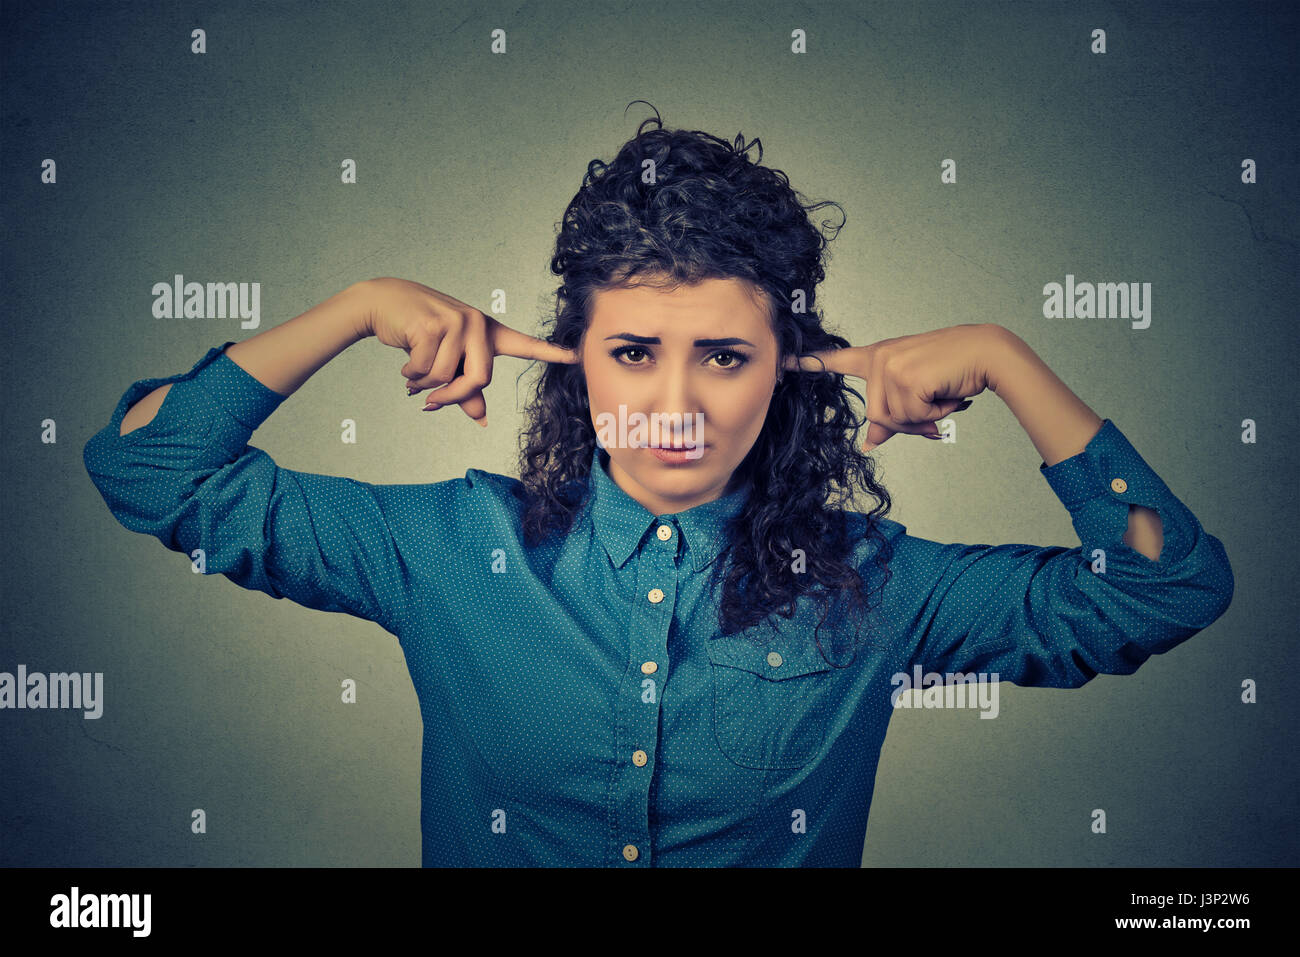 Closeup portrait upset woman plugging ears with fingers doesn't want to listen Stock Photo